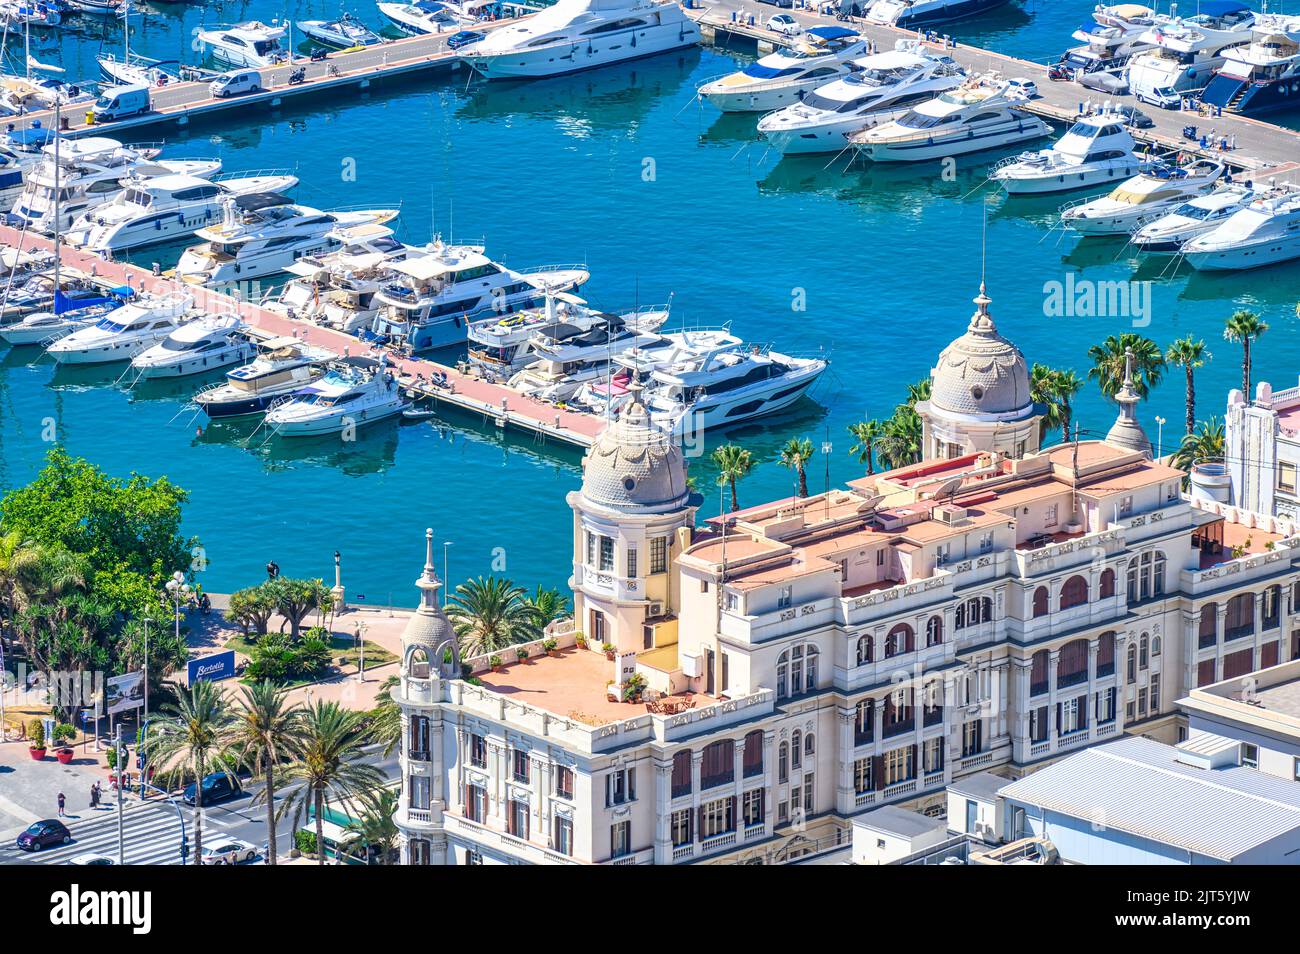 A marina with yachts. The scene includes the Casa Carbonell with its two domes or cupolas. Stock Photo